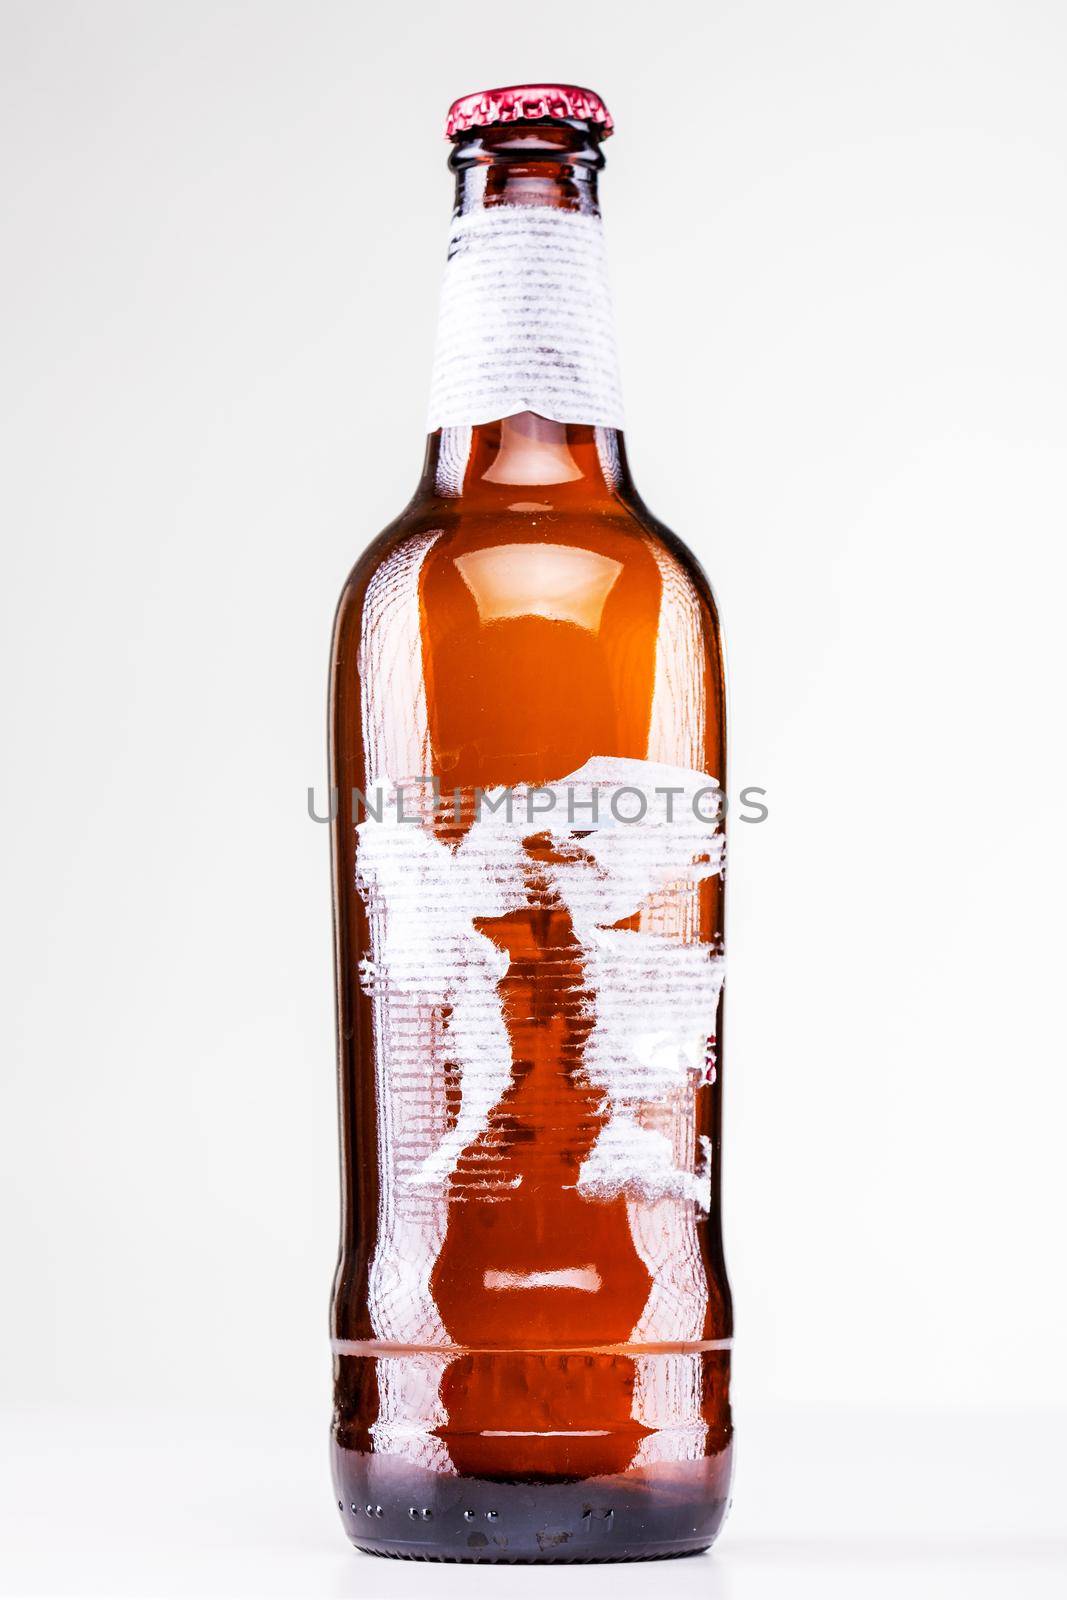 beer bottle with torn label by kokimk